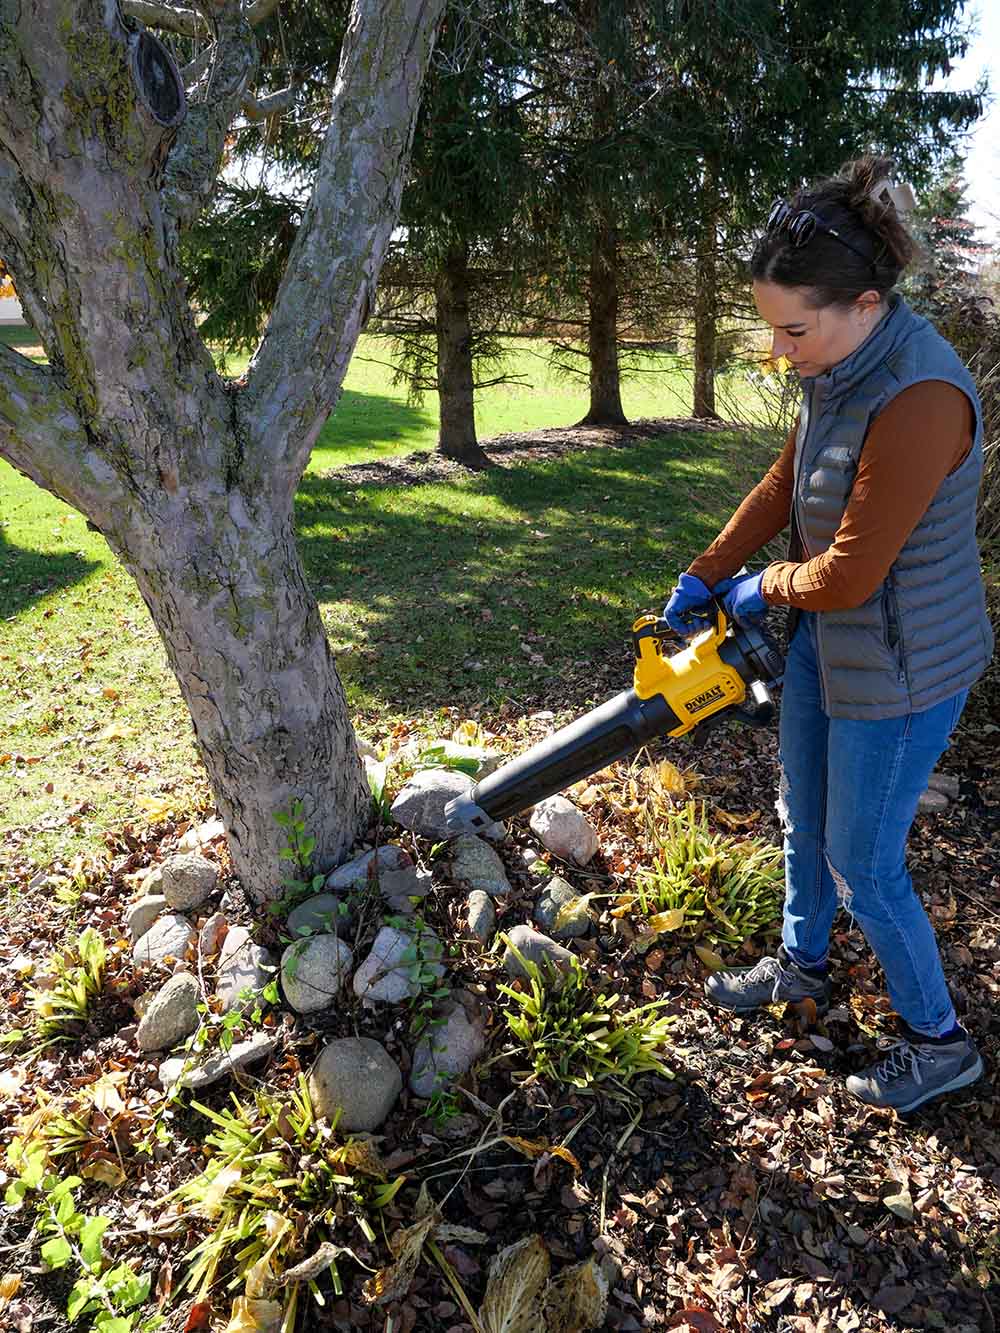 A woman using a leaf blower to remove scattered leaves from the garden beds.